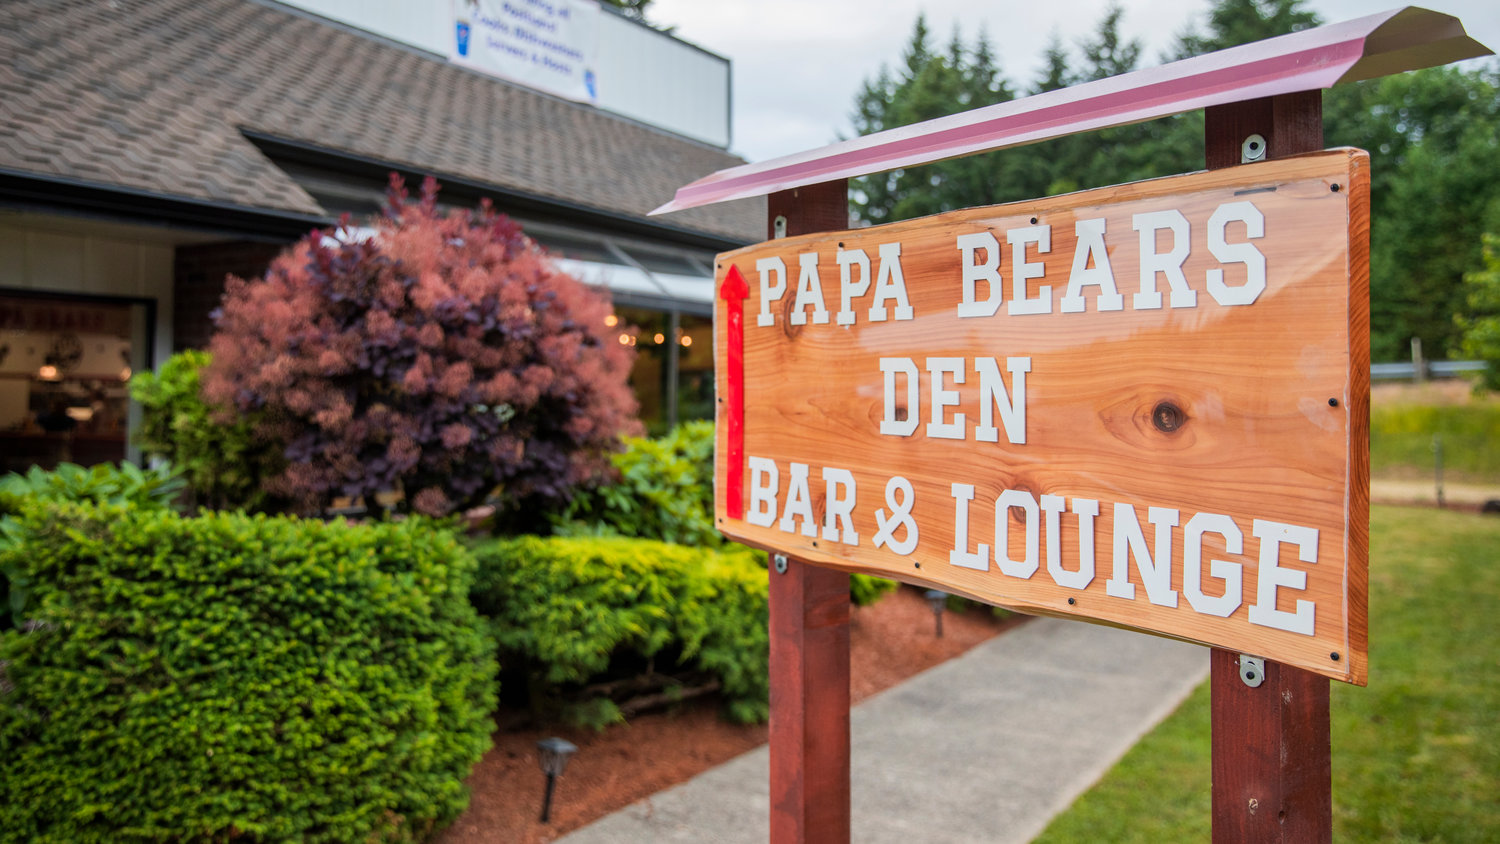 Papa Bears Den Bar & Lounge features a back entrance located off U.S. Highway 12.